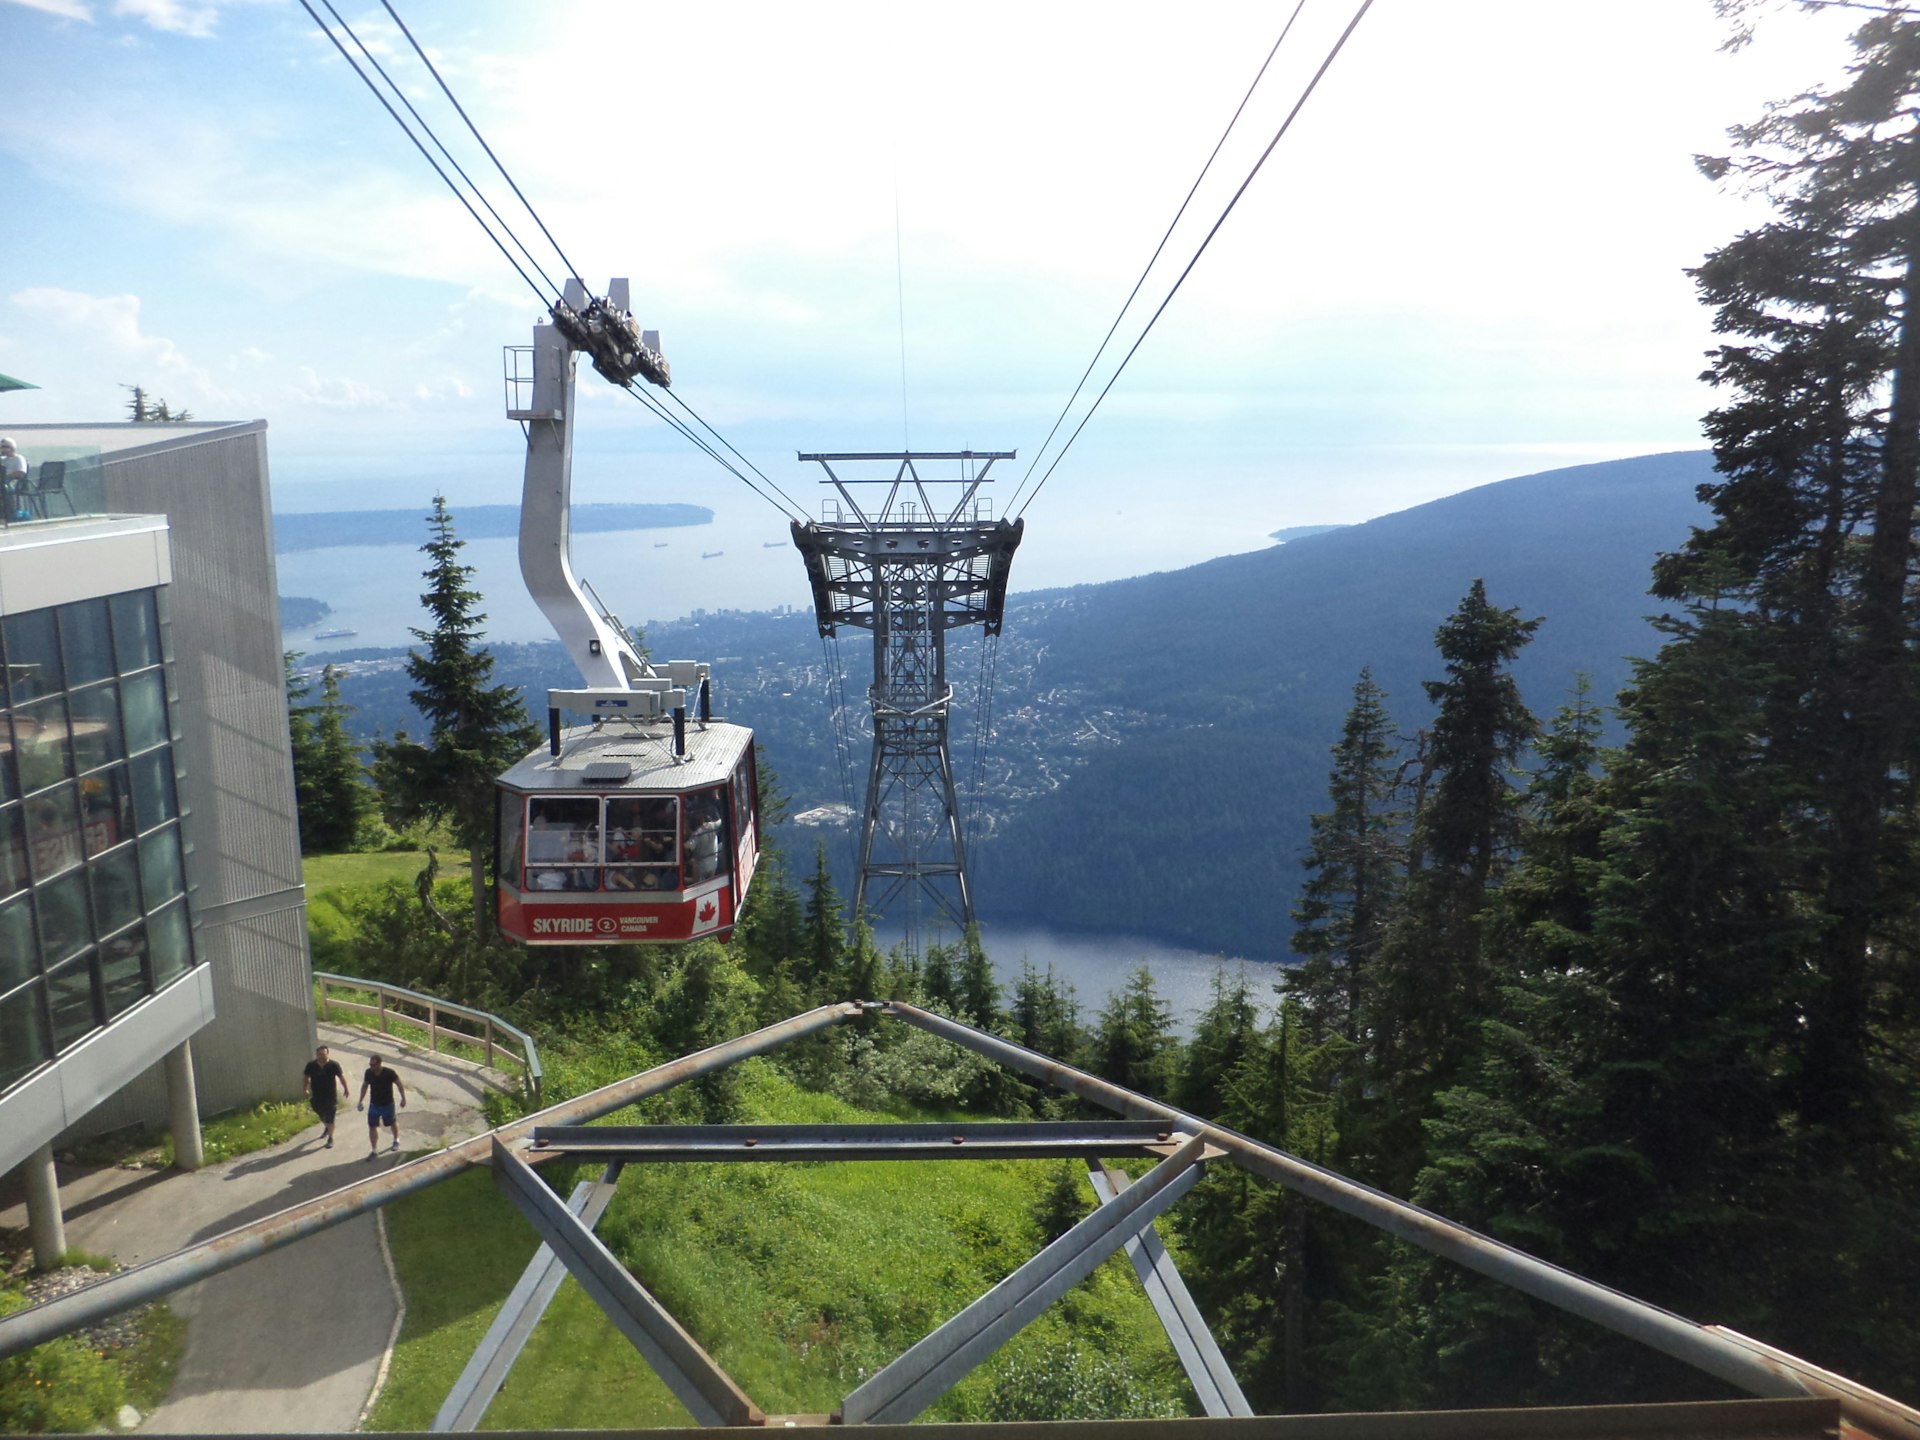 A cable car descends in front of beautiful mountain scenery.  